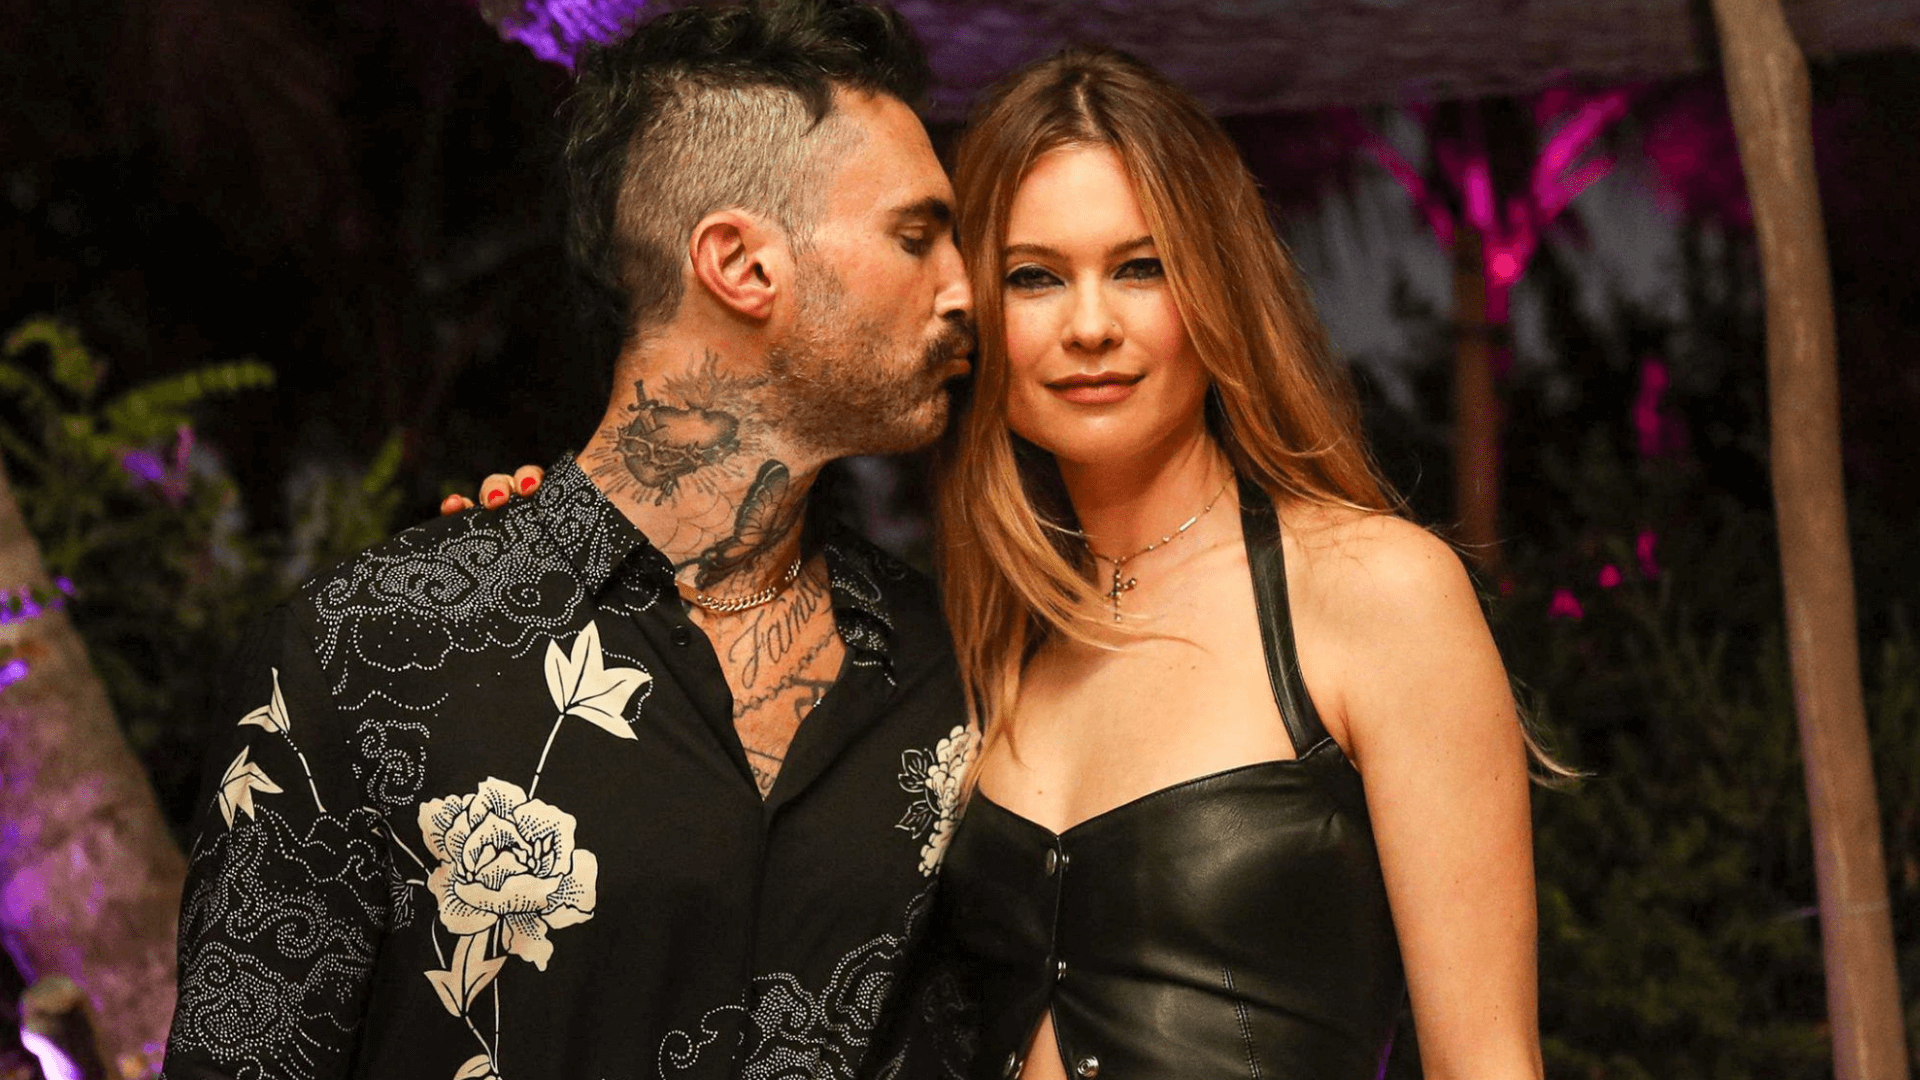 Adam Levine Allegedly Cheating on His Wife Behati Prinsloo